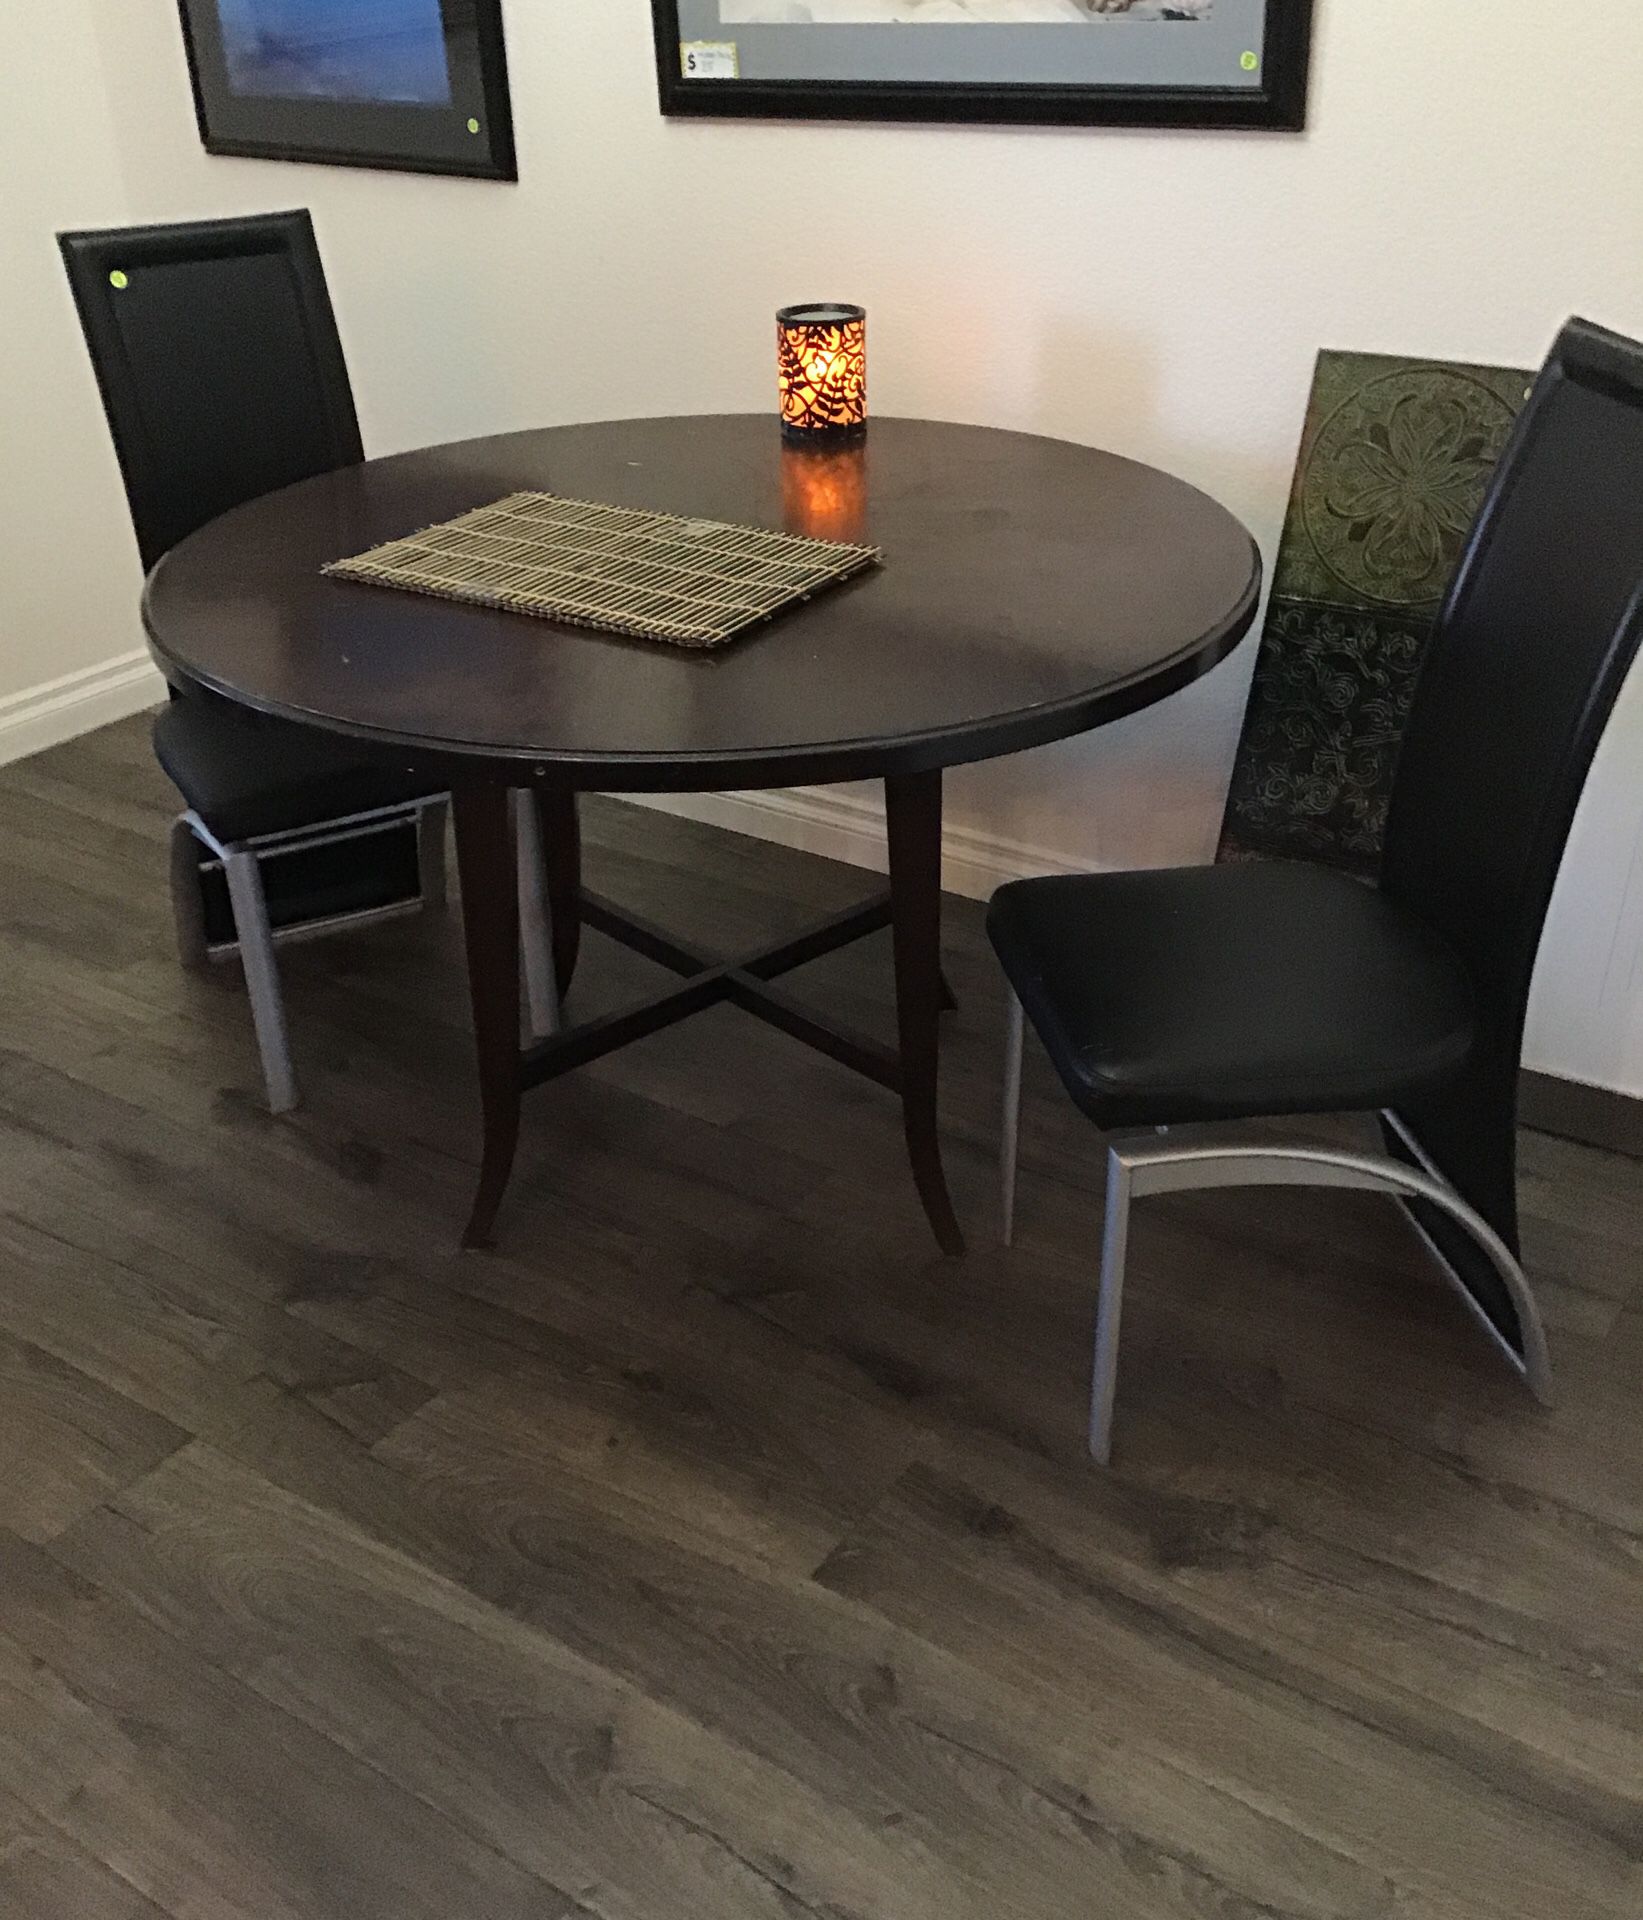 Kitchen table and 2 chairs